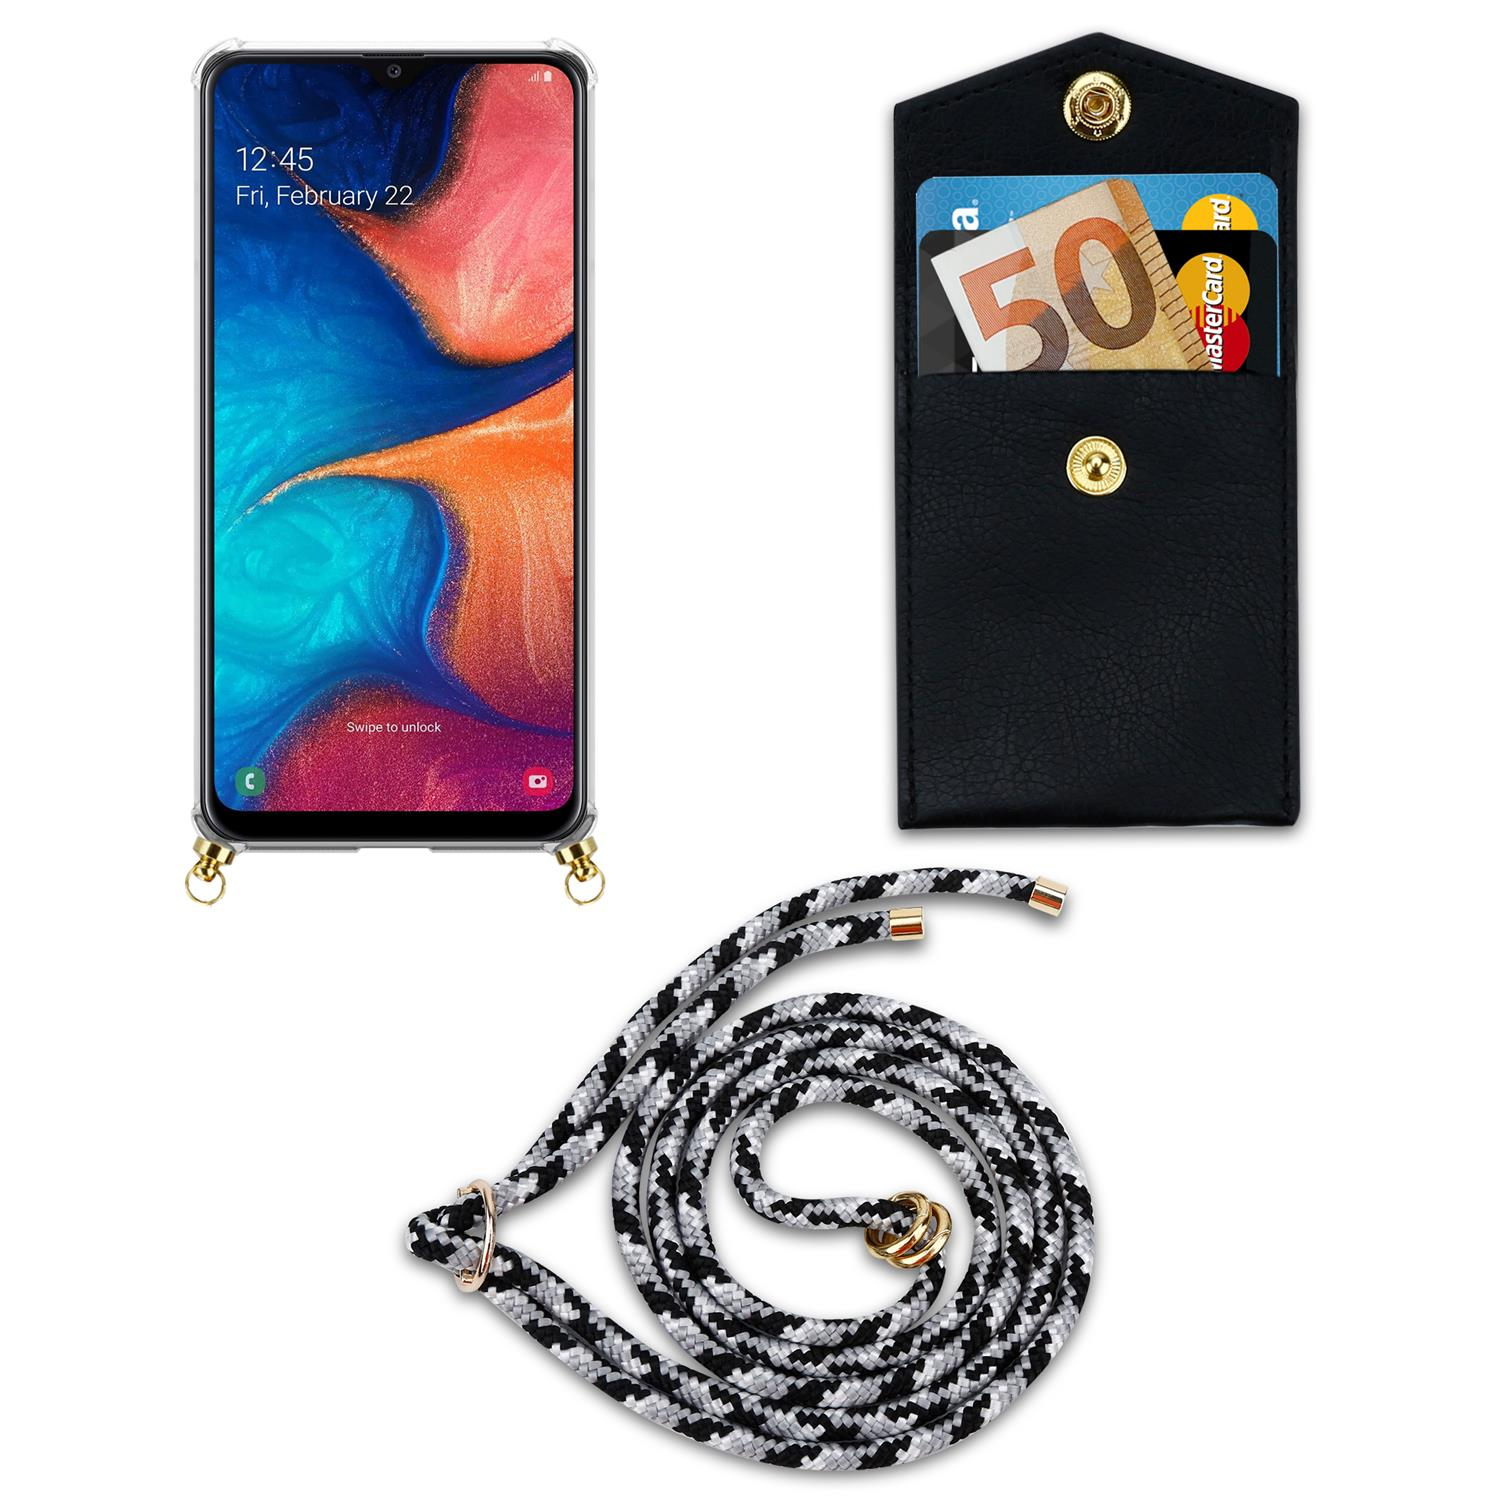 CADORABO Handy Kette mit Gold Samsung, A20 / CAMOUFLAGE Band Kordel und Ringen, abnehmbarer A30 SCHWARZ M10s, / Backcover, Galaxy Hülle